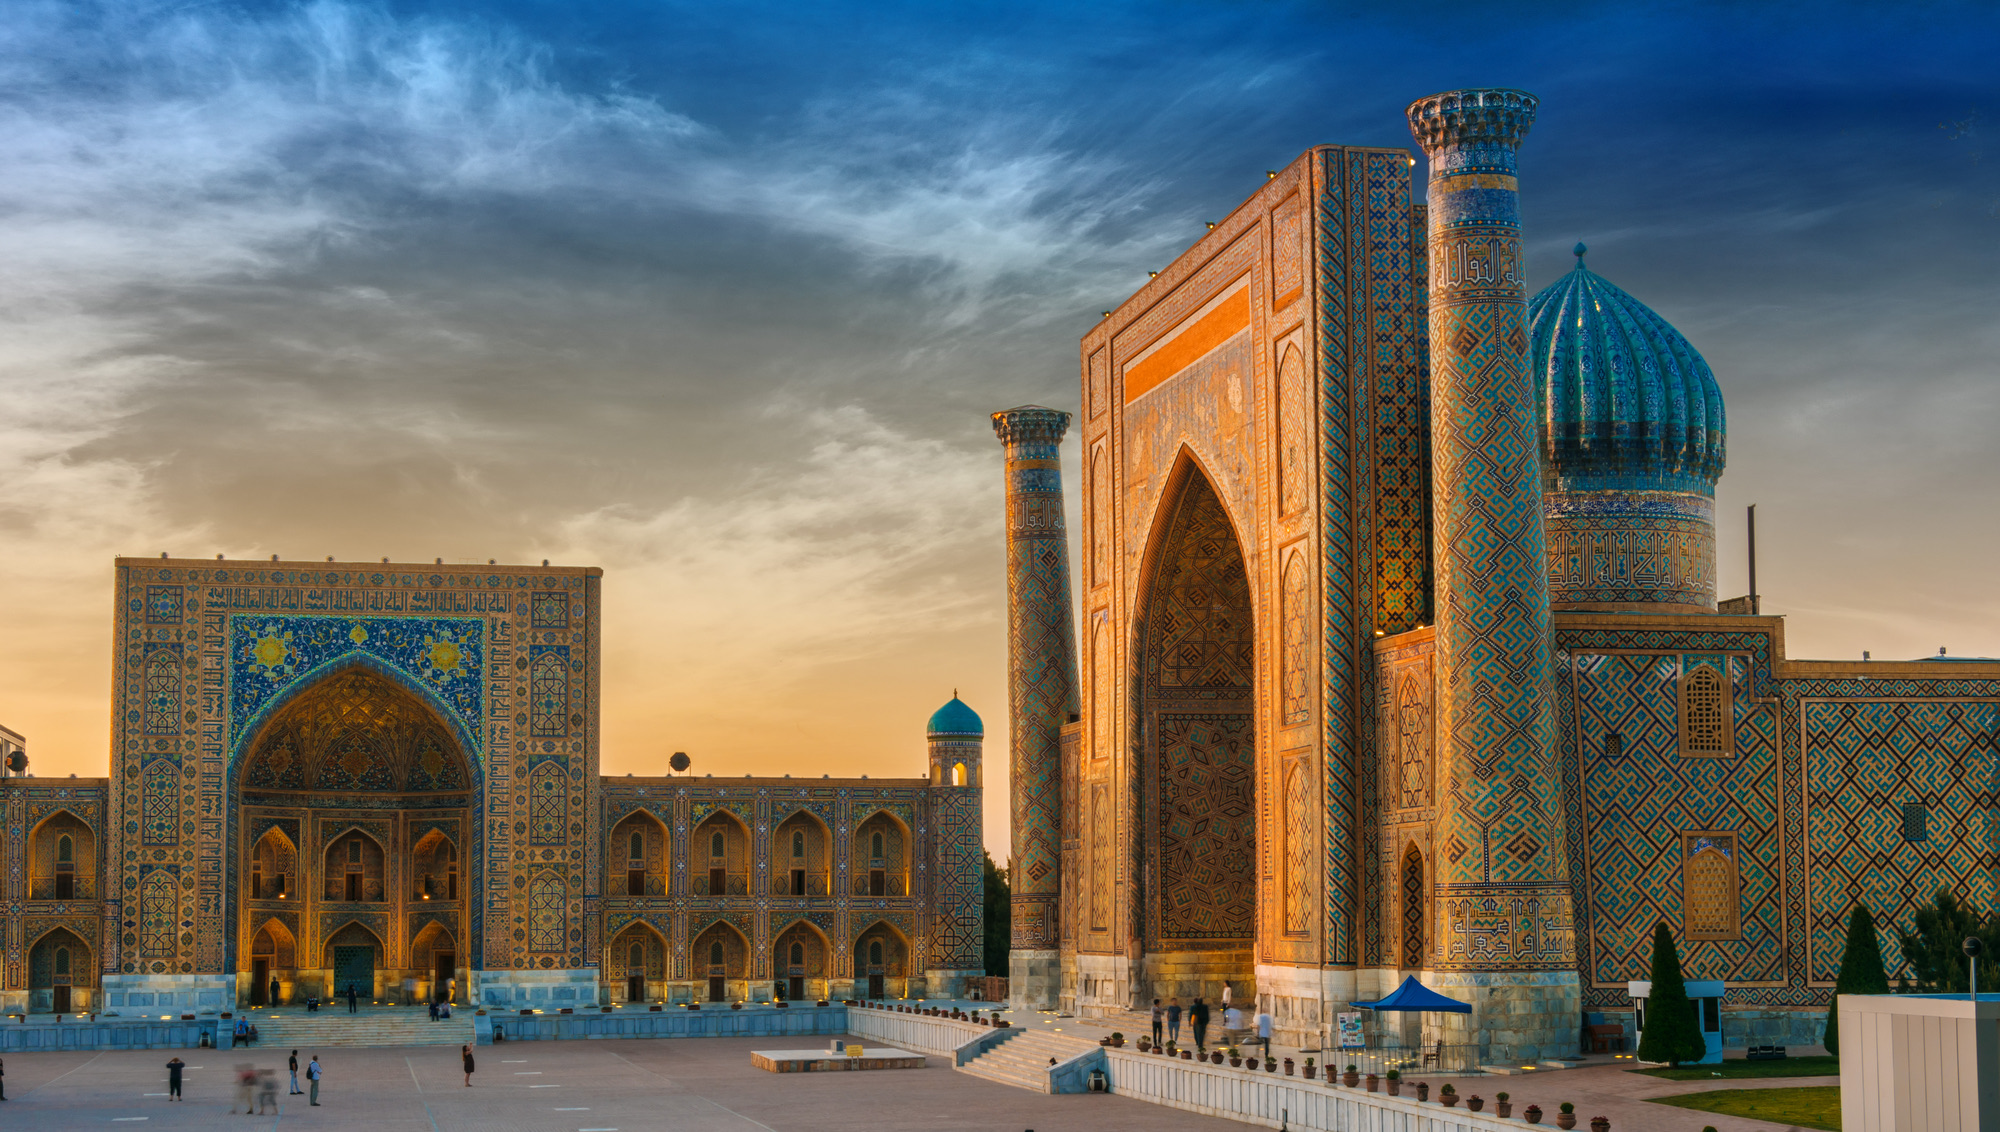 Registan, an old public square in the heart of the ancient city of Samarkand, Uzbekistan.